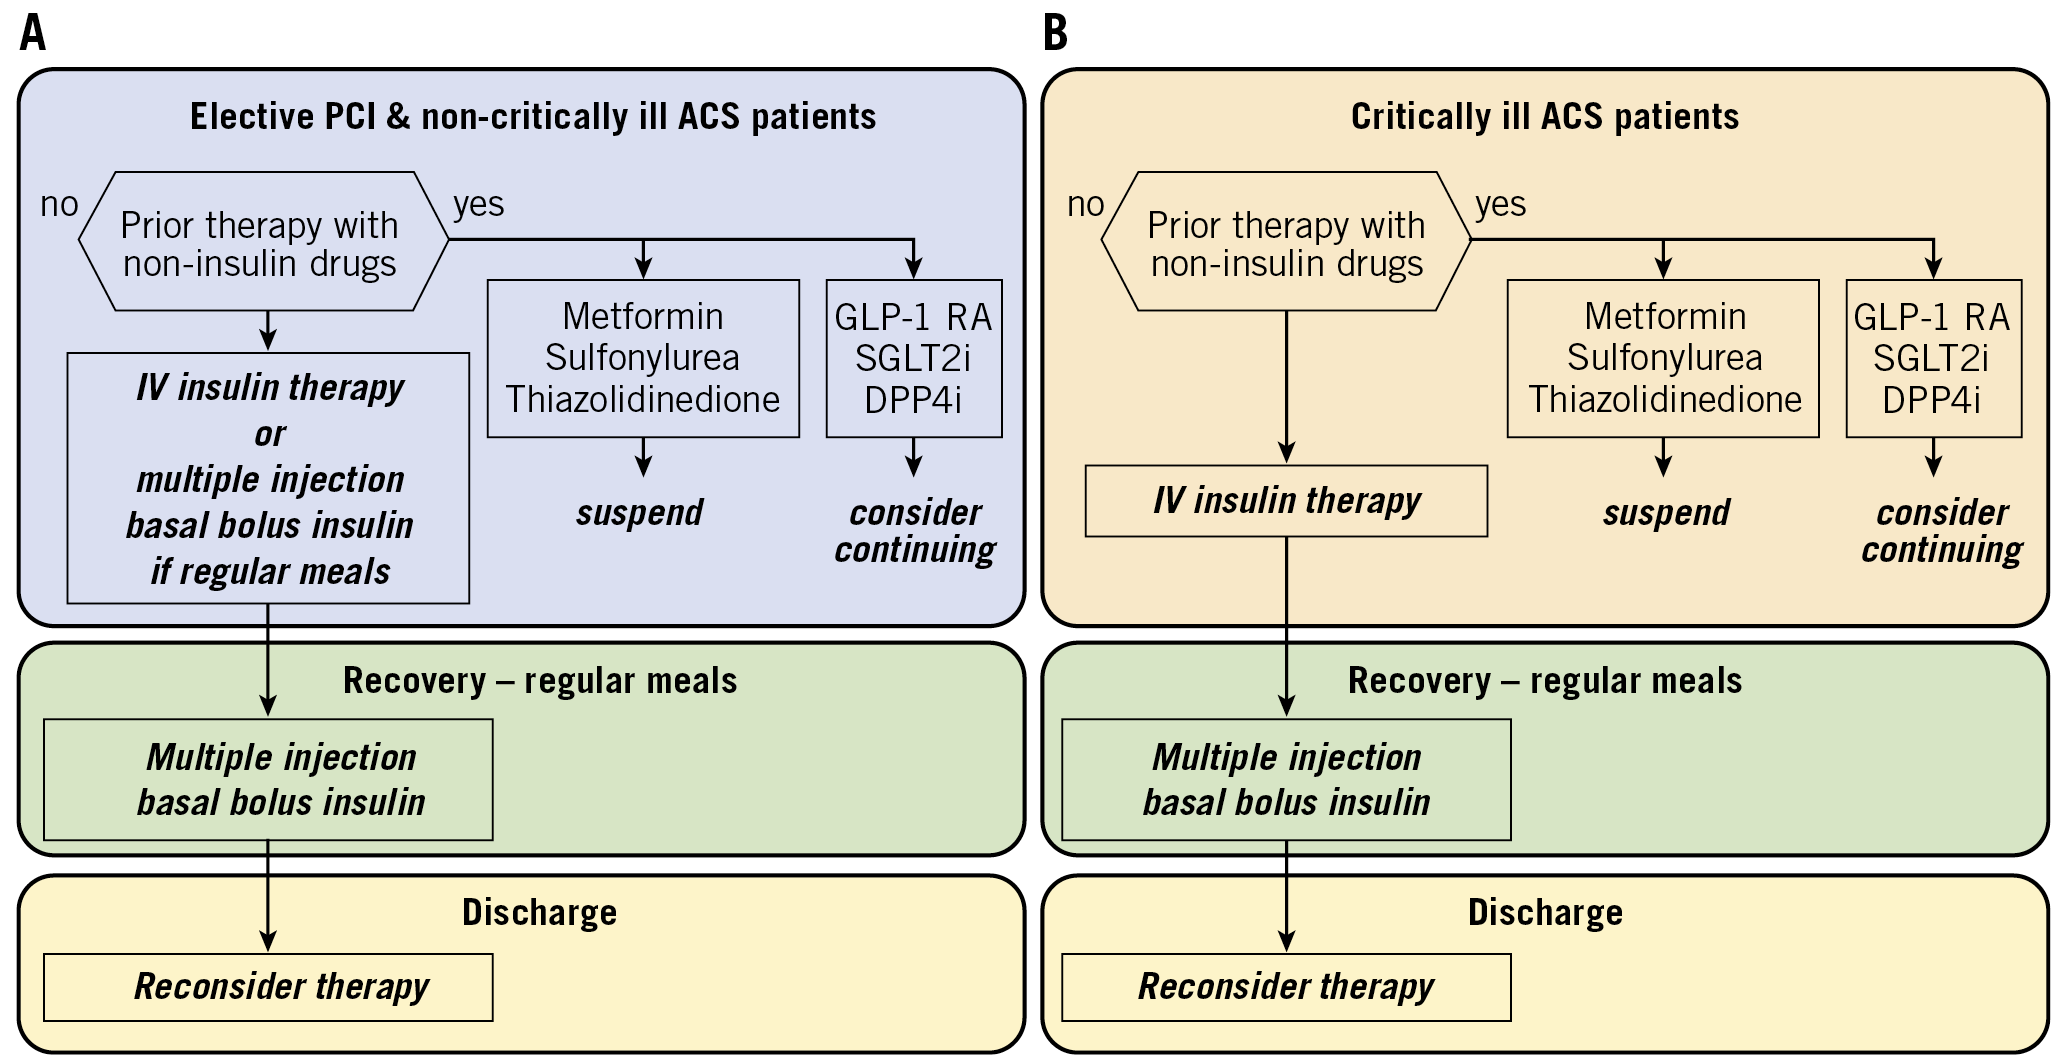 Figure 2. Flow chart for the management of hyperglycaemia. A) In non-critically ill ACS patients and patients undergoing elective PCI. B) In critically ill ACS patients. ACS: acute coronary syndrome; DDP4: di-peptidyl peptidase 4; GLP-1 RA: glucagon-like peptide-1 receptor agonist; PCI: percutaneous coronary intervention; SGLT2: sodium-glucose transporter 2 inhibitor